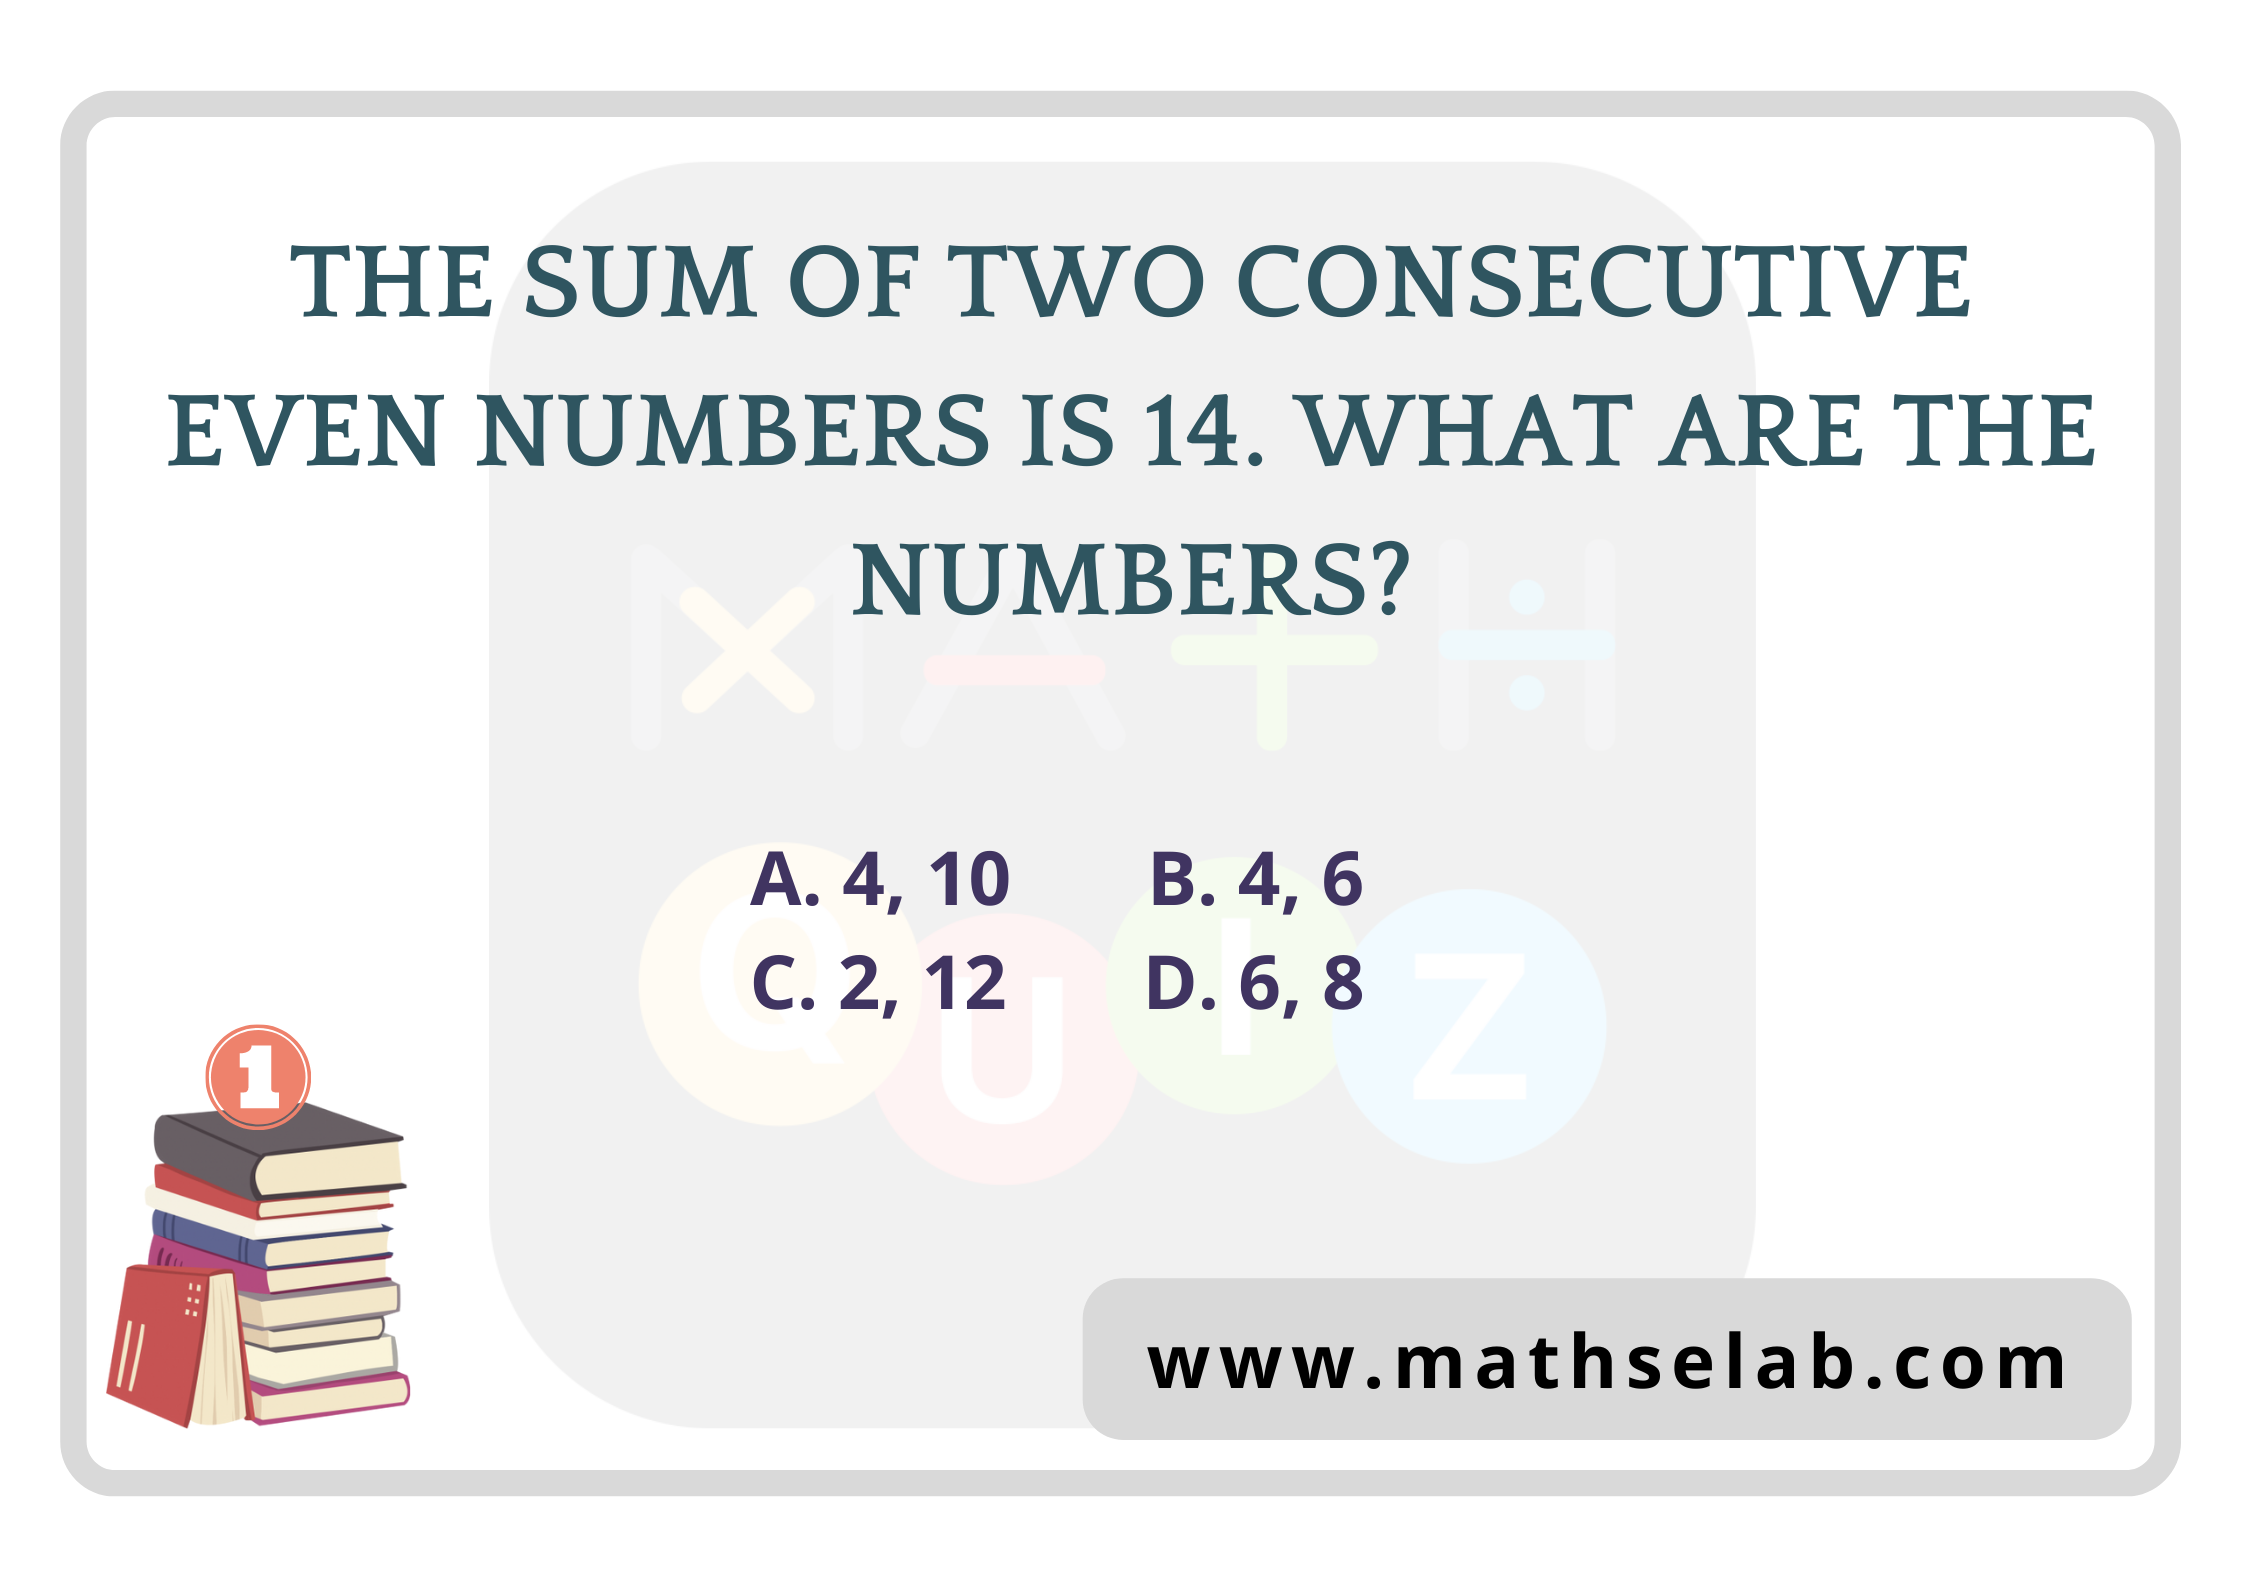 The sum of two consecutive even numbers is 14. What are the numbers?